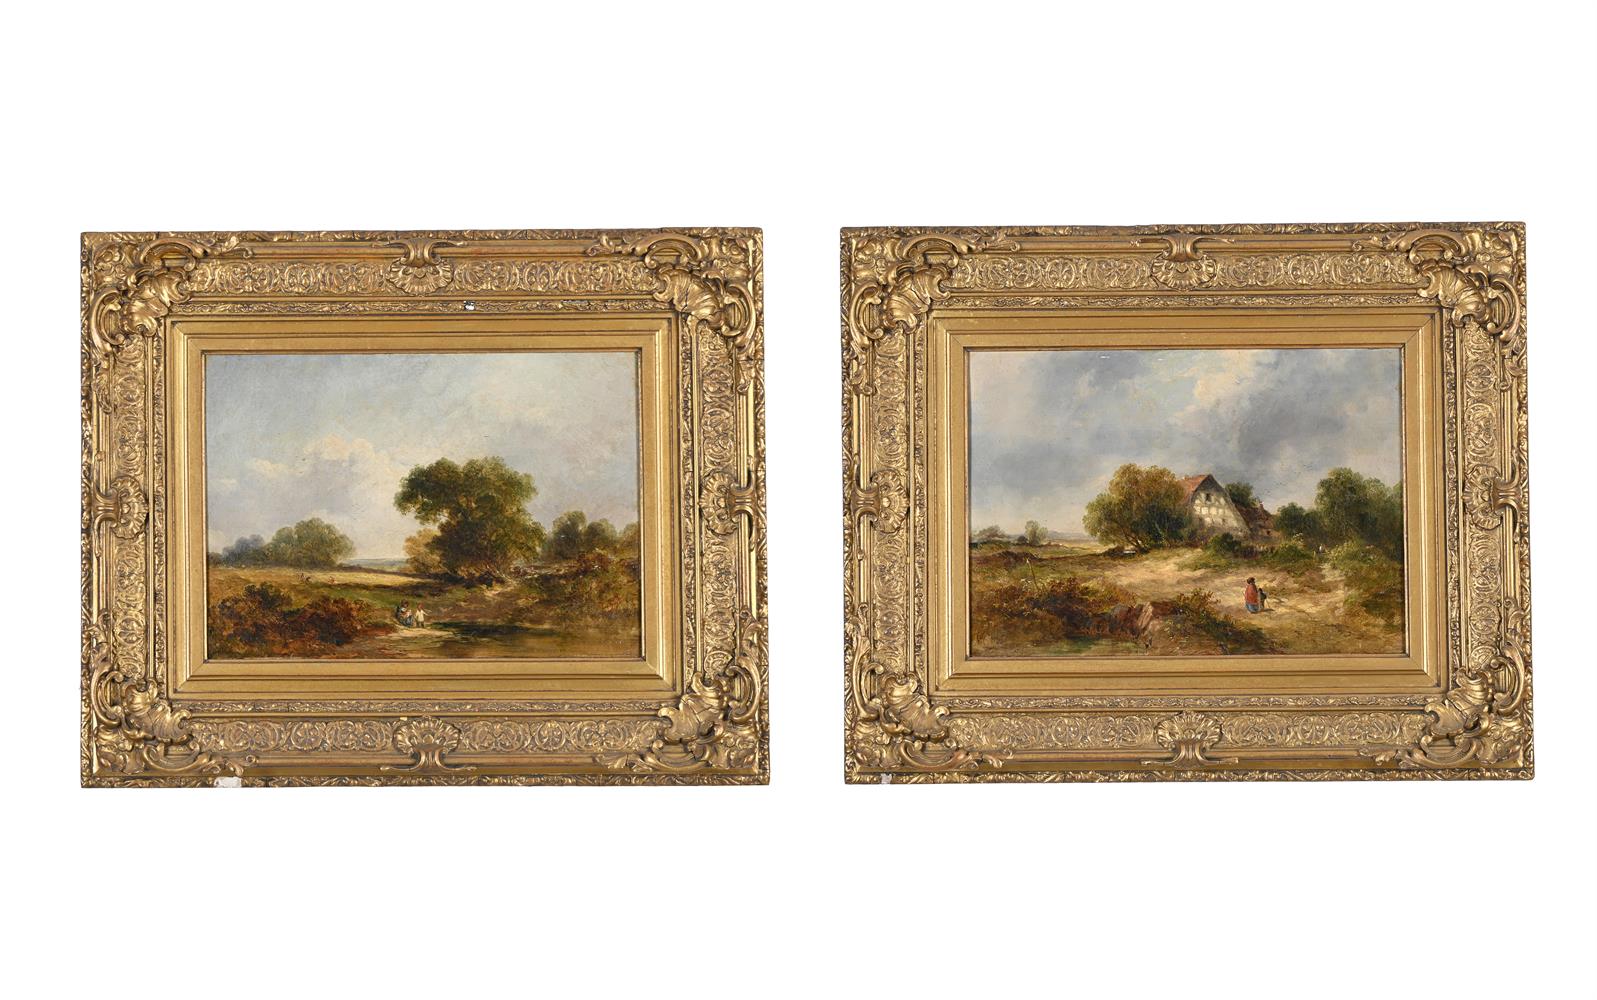 BRITISH SCHOOL (19TH CENTURY), A PAIR OF RURAL LANDSCAPES